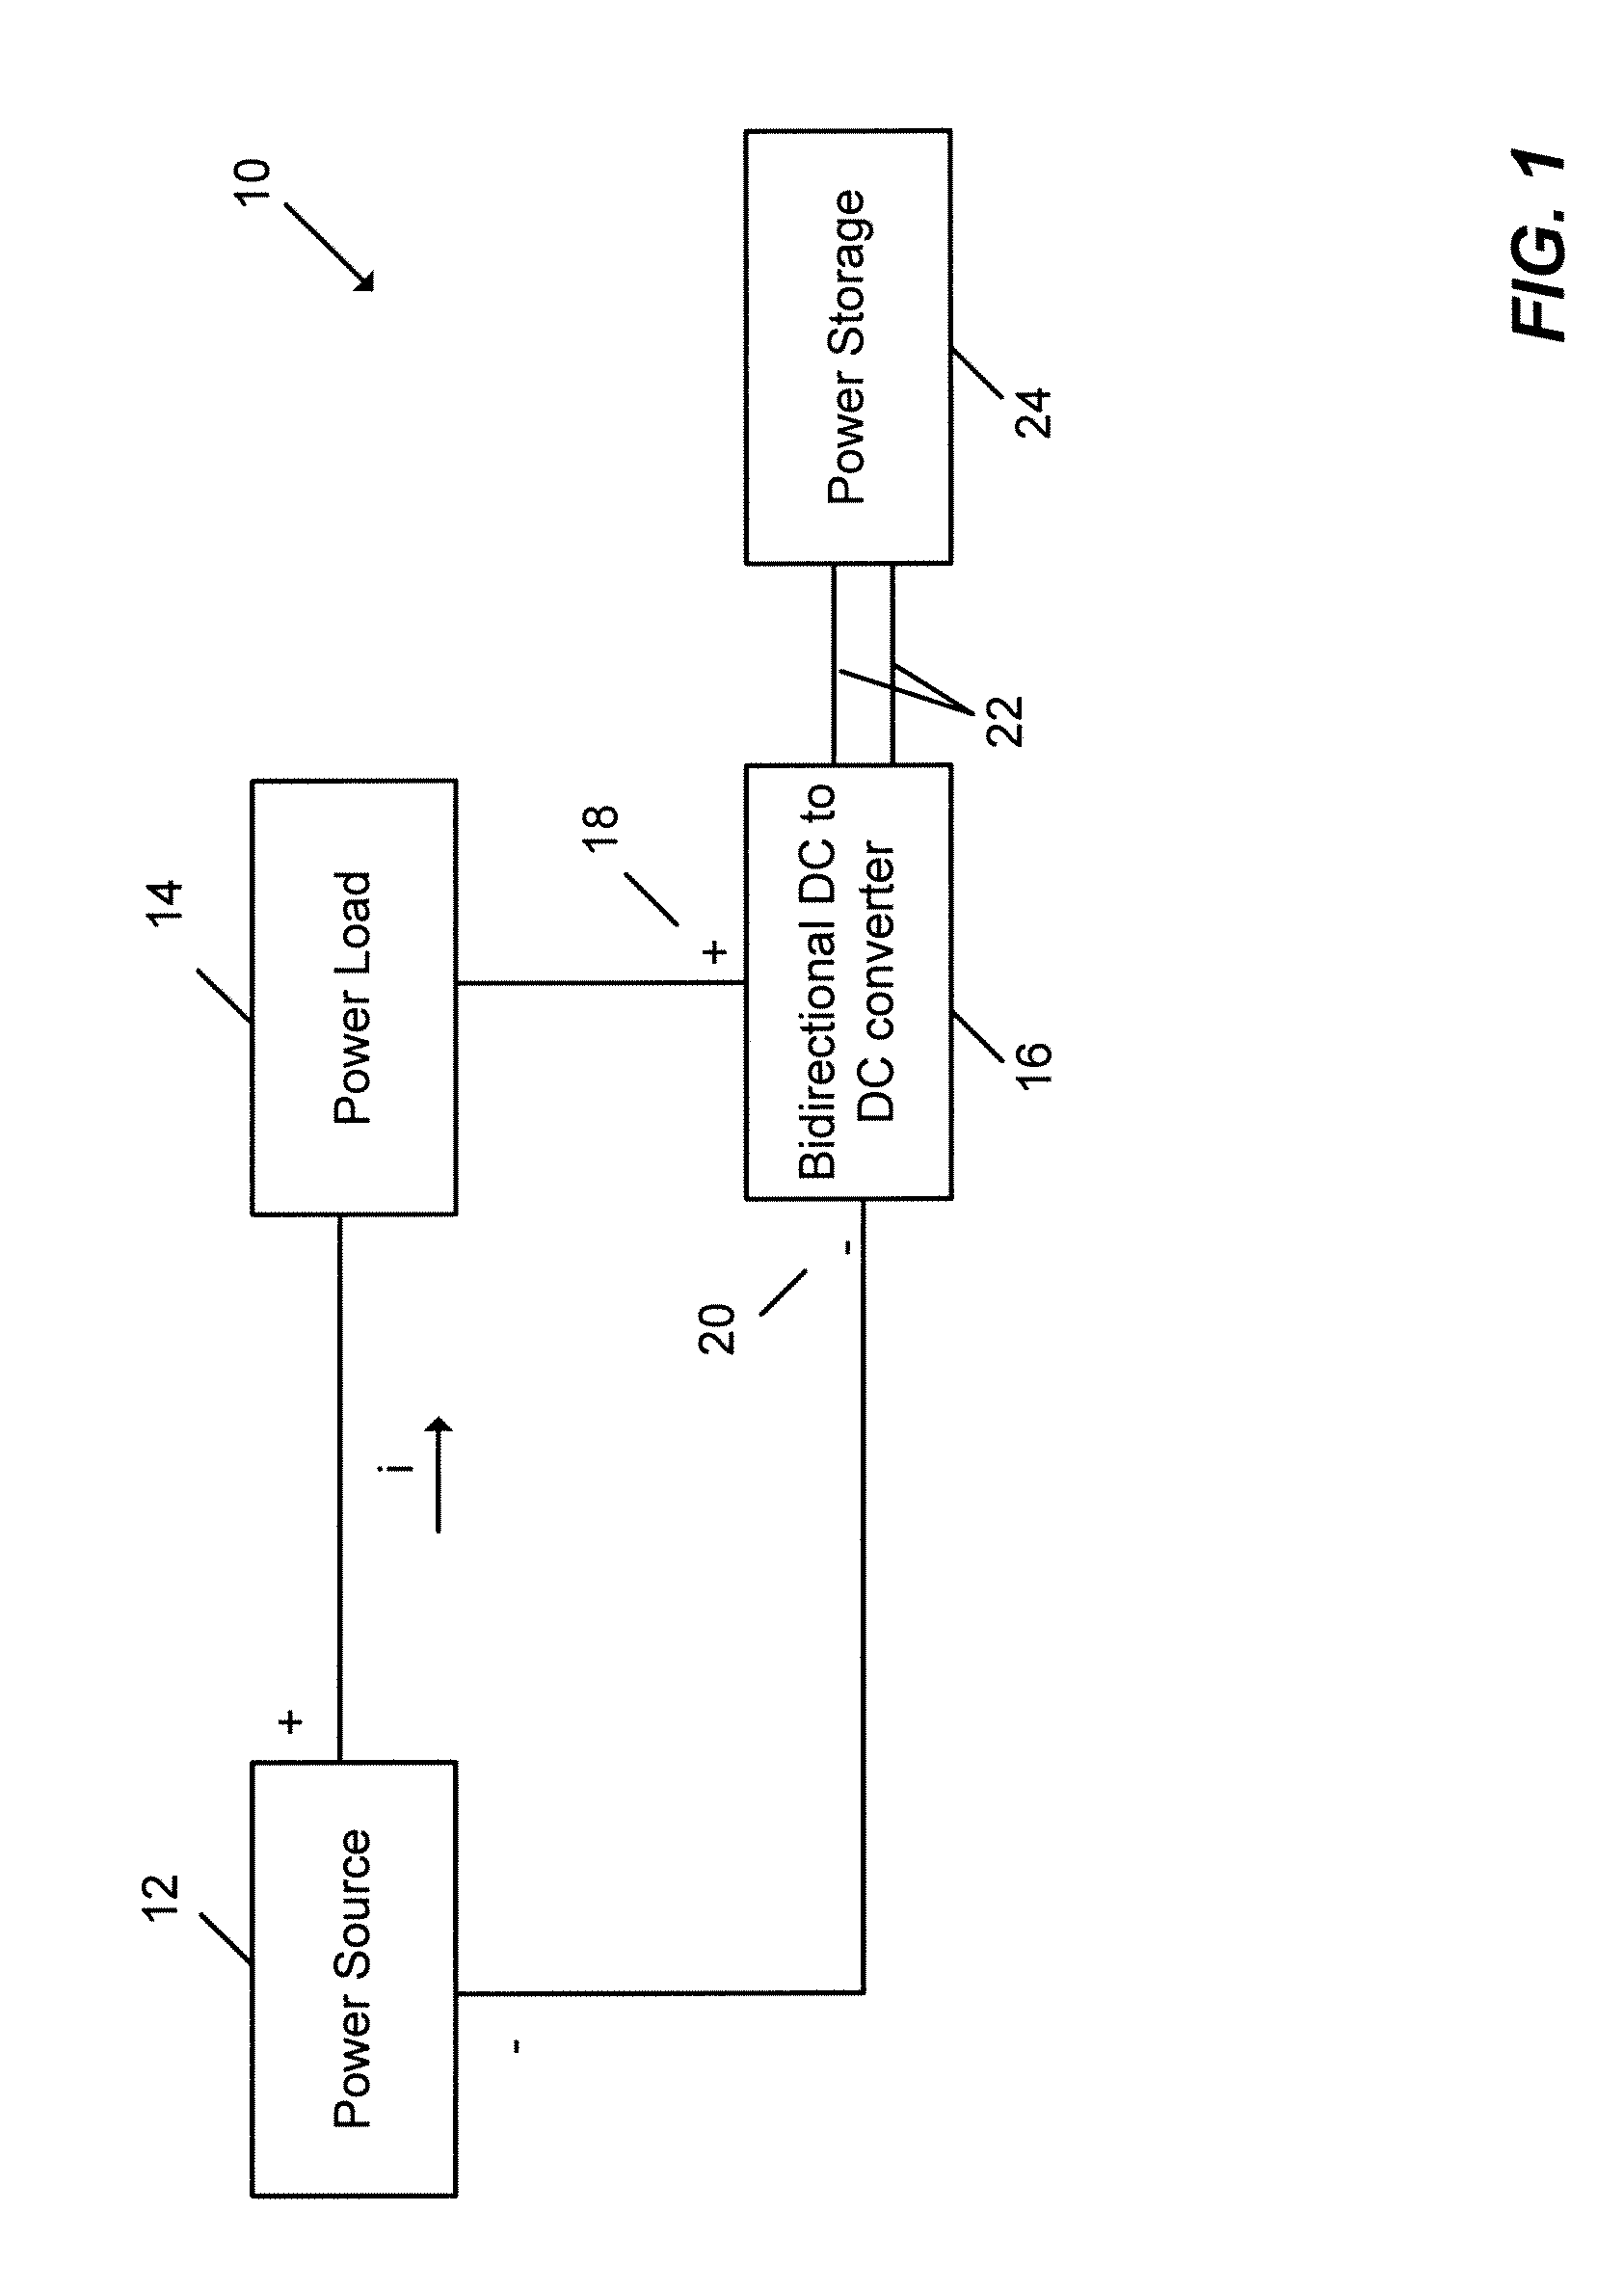 Bidirectional DC to DC Converter for Power Storage Control in a Power Scavenging Application